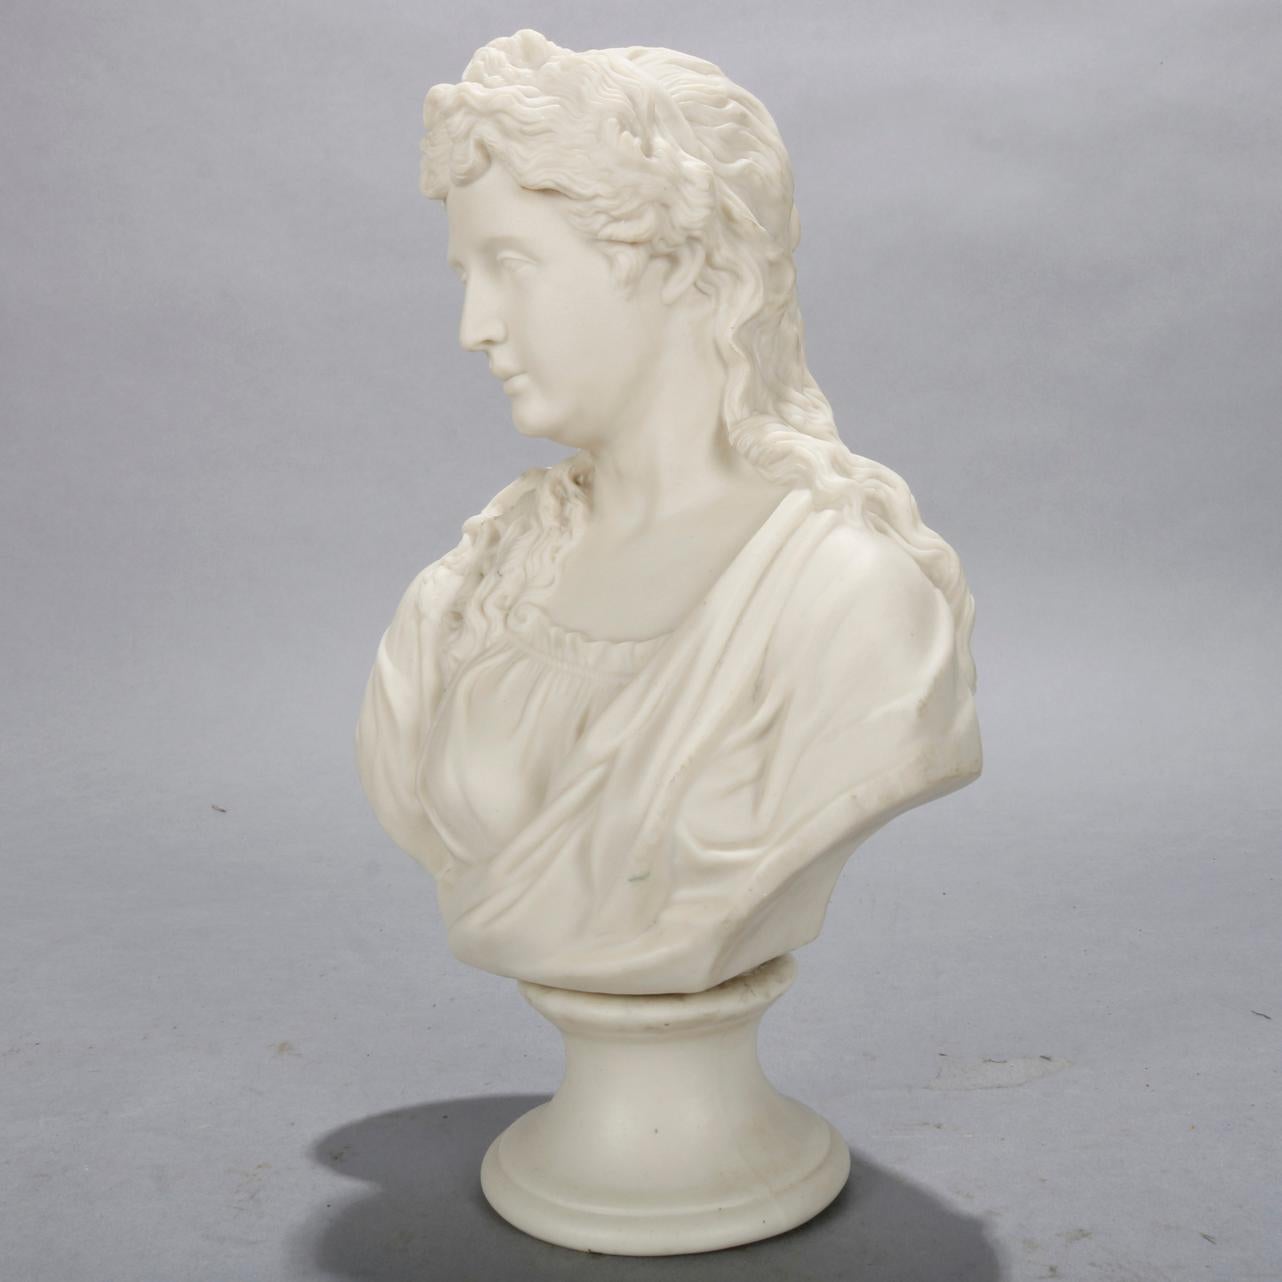 An antique Classical Greek parian sculpture bust in the manner of Copeland depicts portrait of young woman on plinth, en verso stamped KC 212 as photographed, circa 1890.

Measures: 12